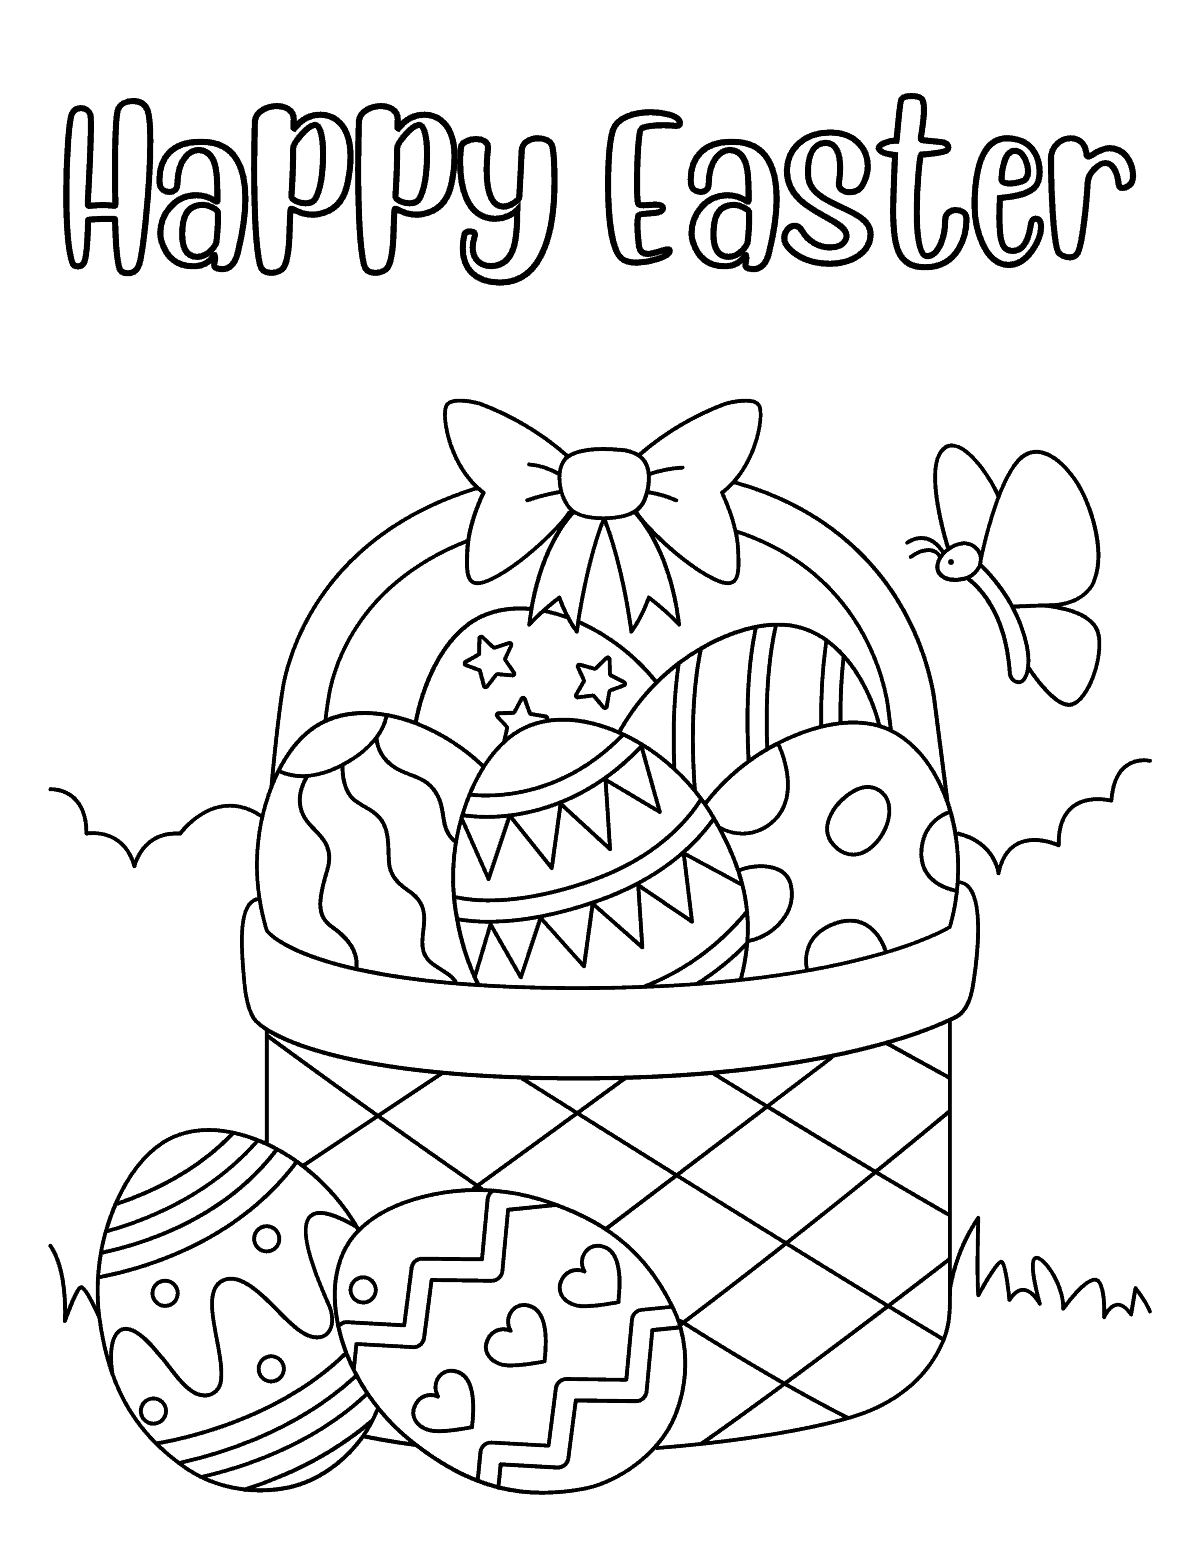 Easter Basket Filled with Eggs Coloring Page